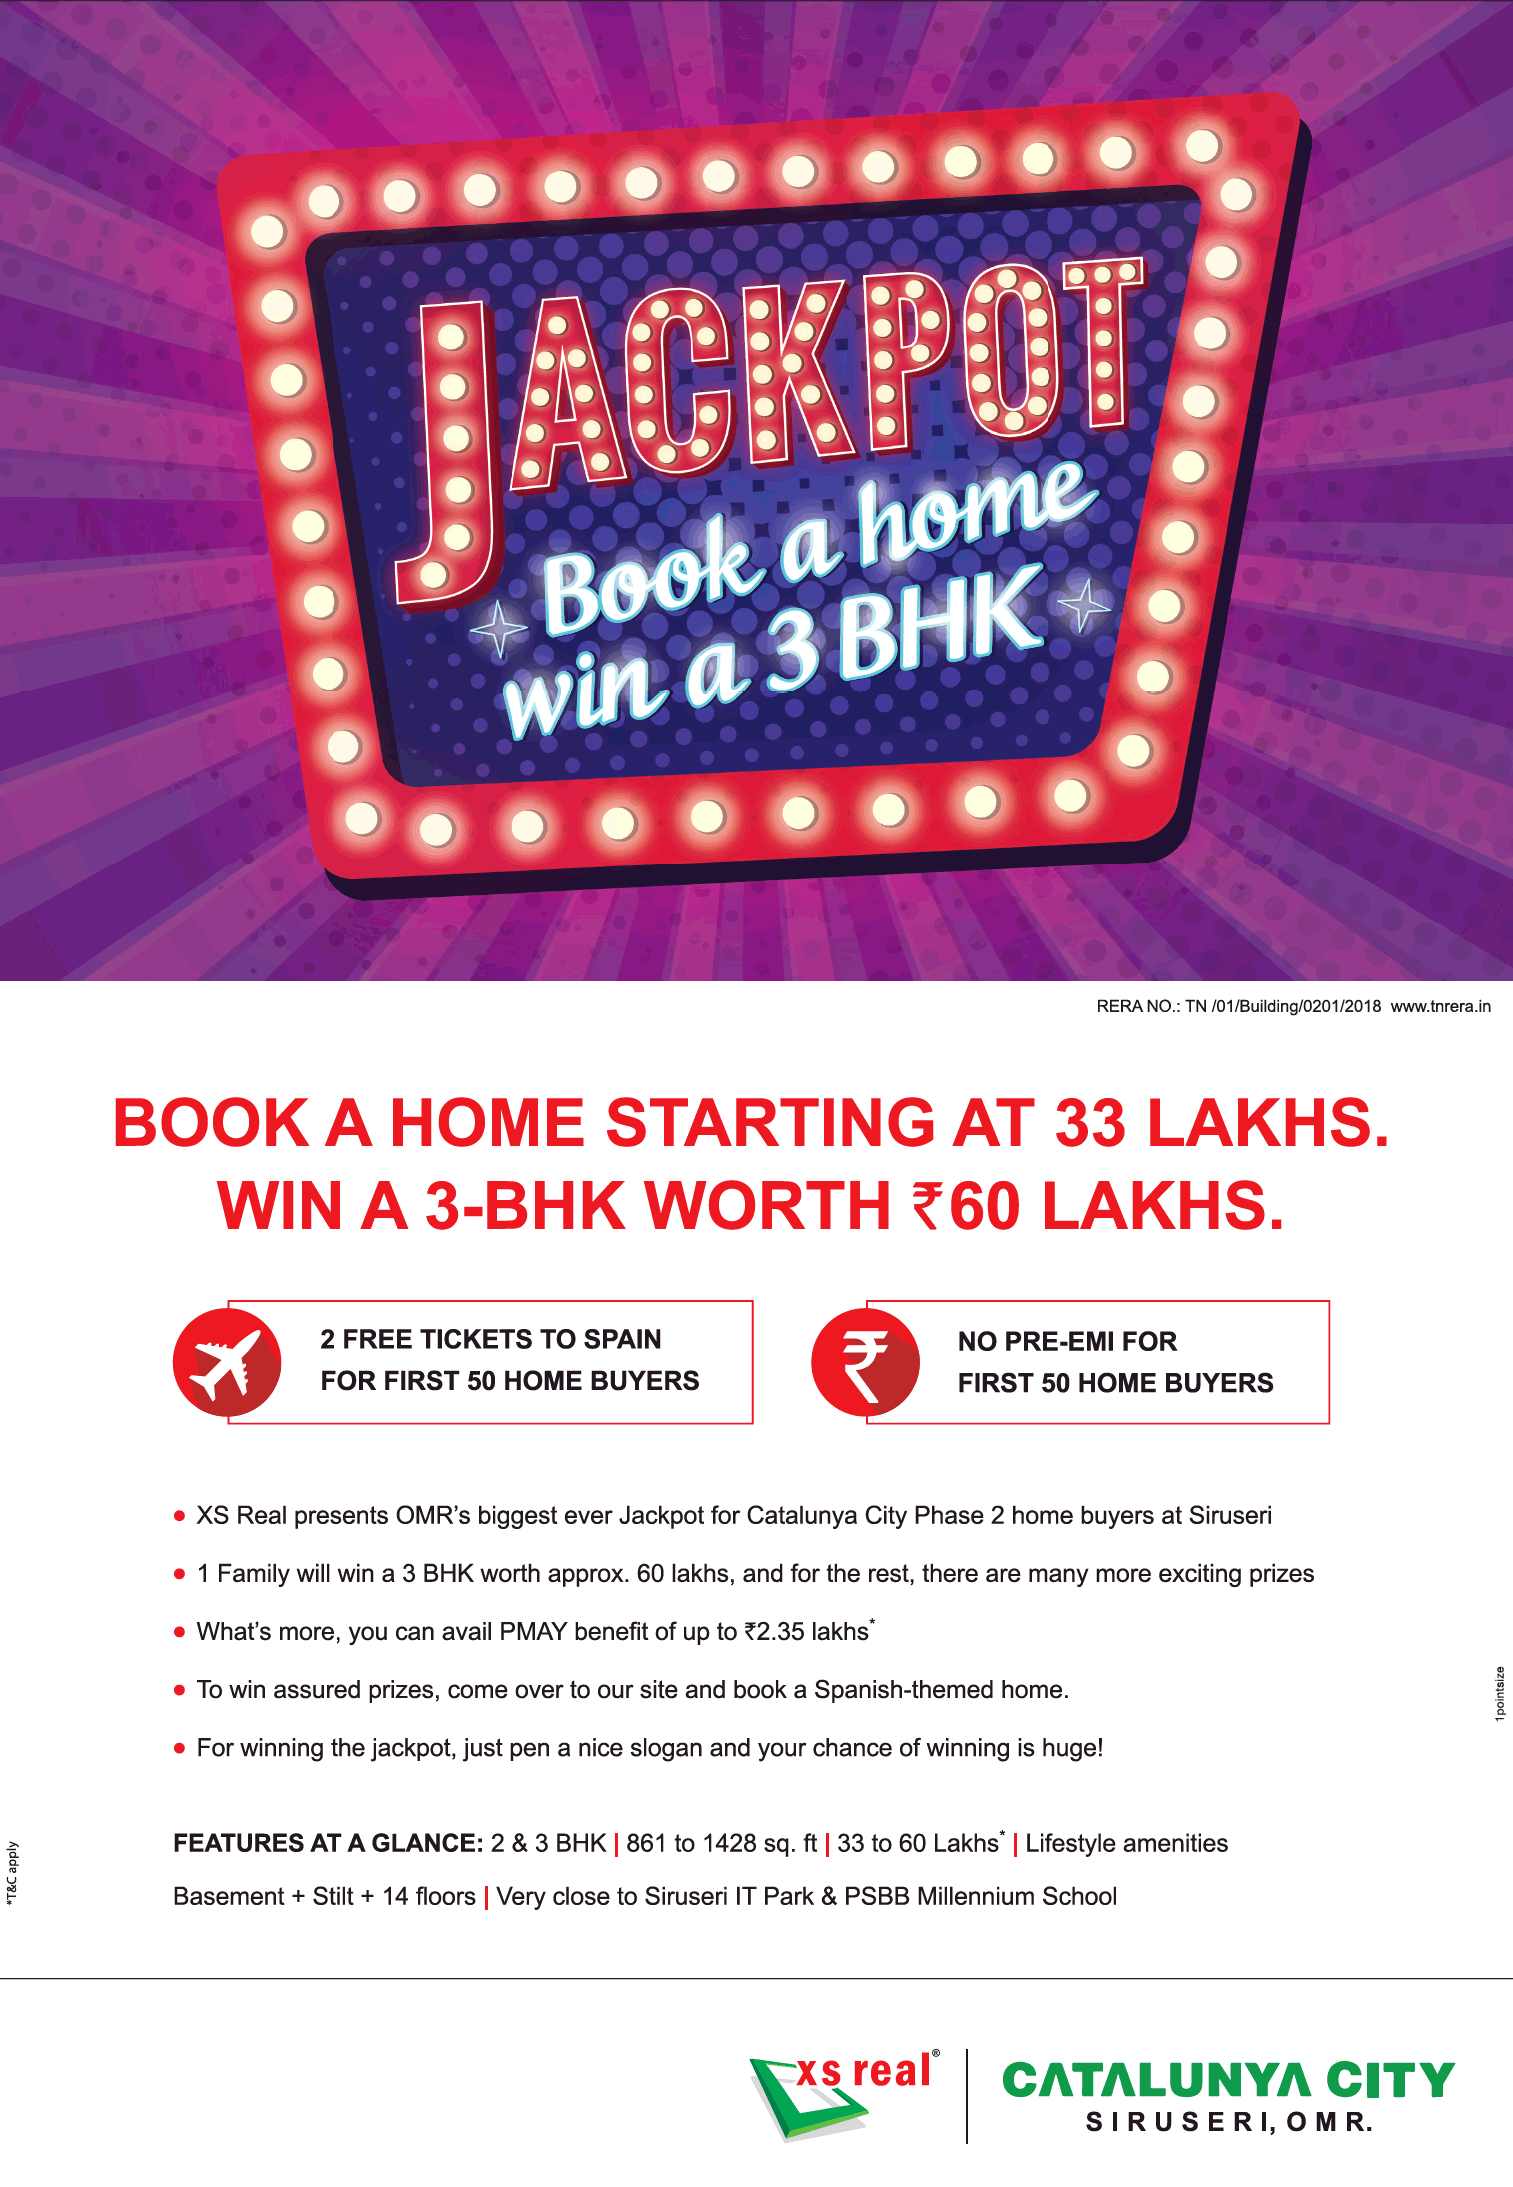 Book a home & get a chance to win a 3 BHK worth Rs 60 Lakhs at XS Real Catalunya City in Chennai